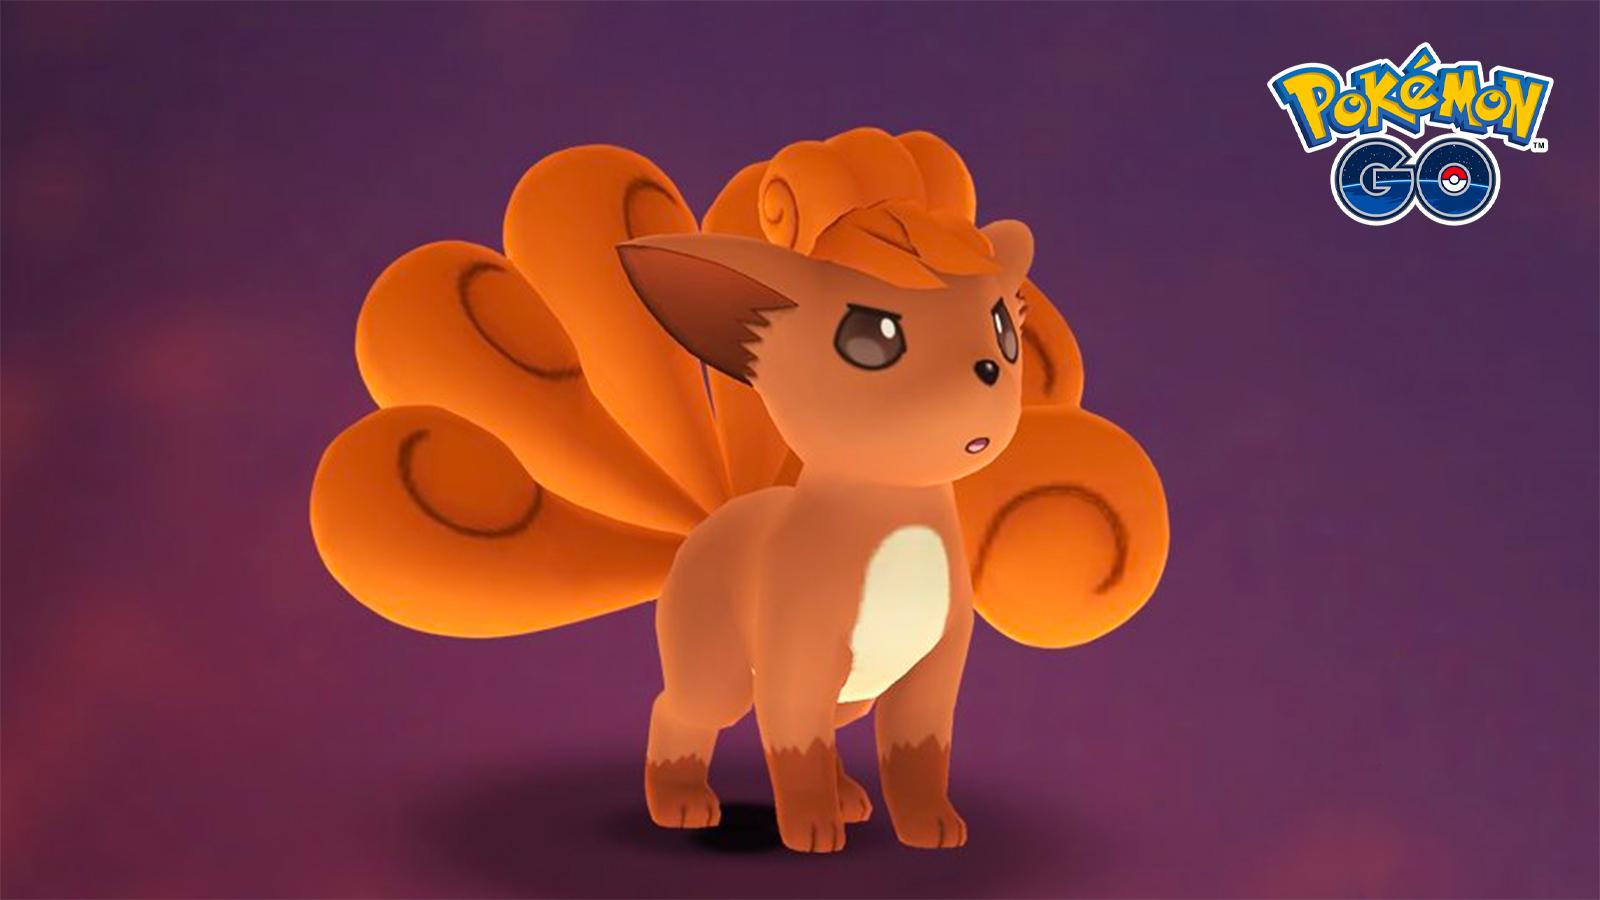 Vulpix appearing in the Pokemon Go Battle Day